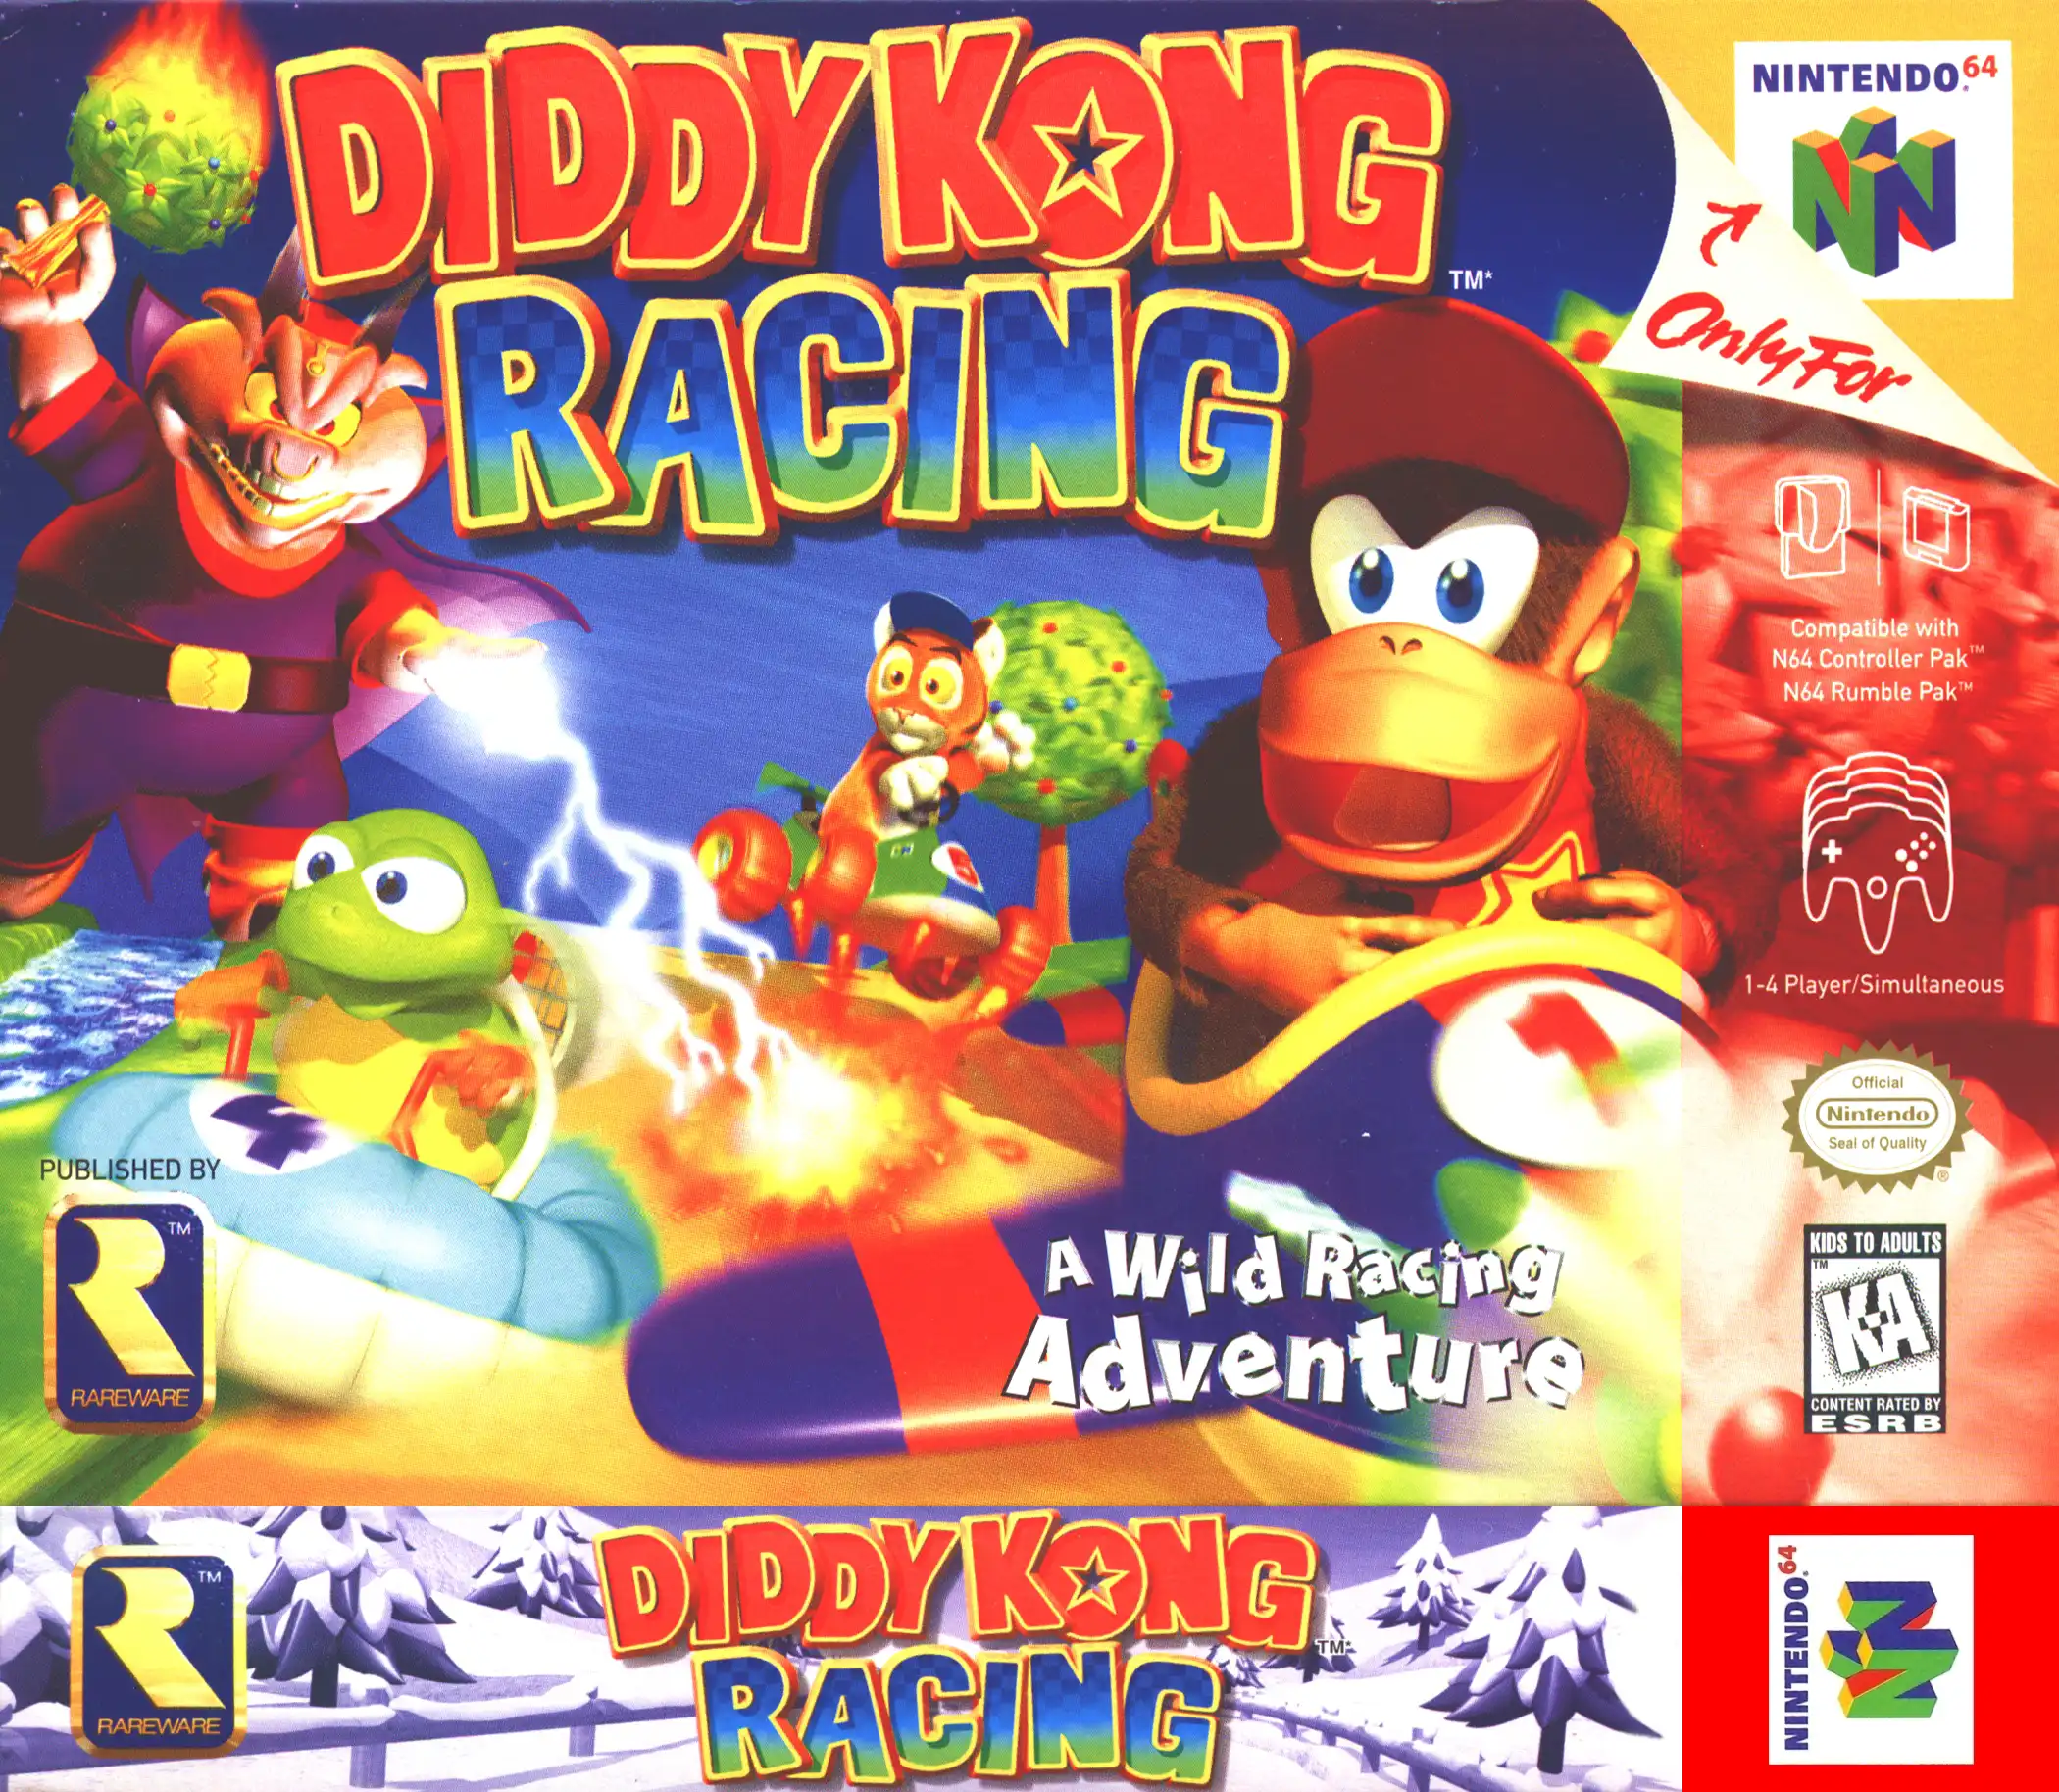 N64® Diddy Kong Racing game box front.